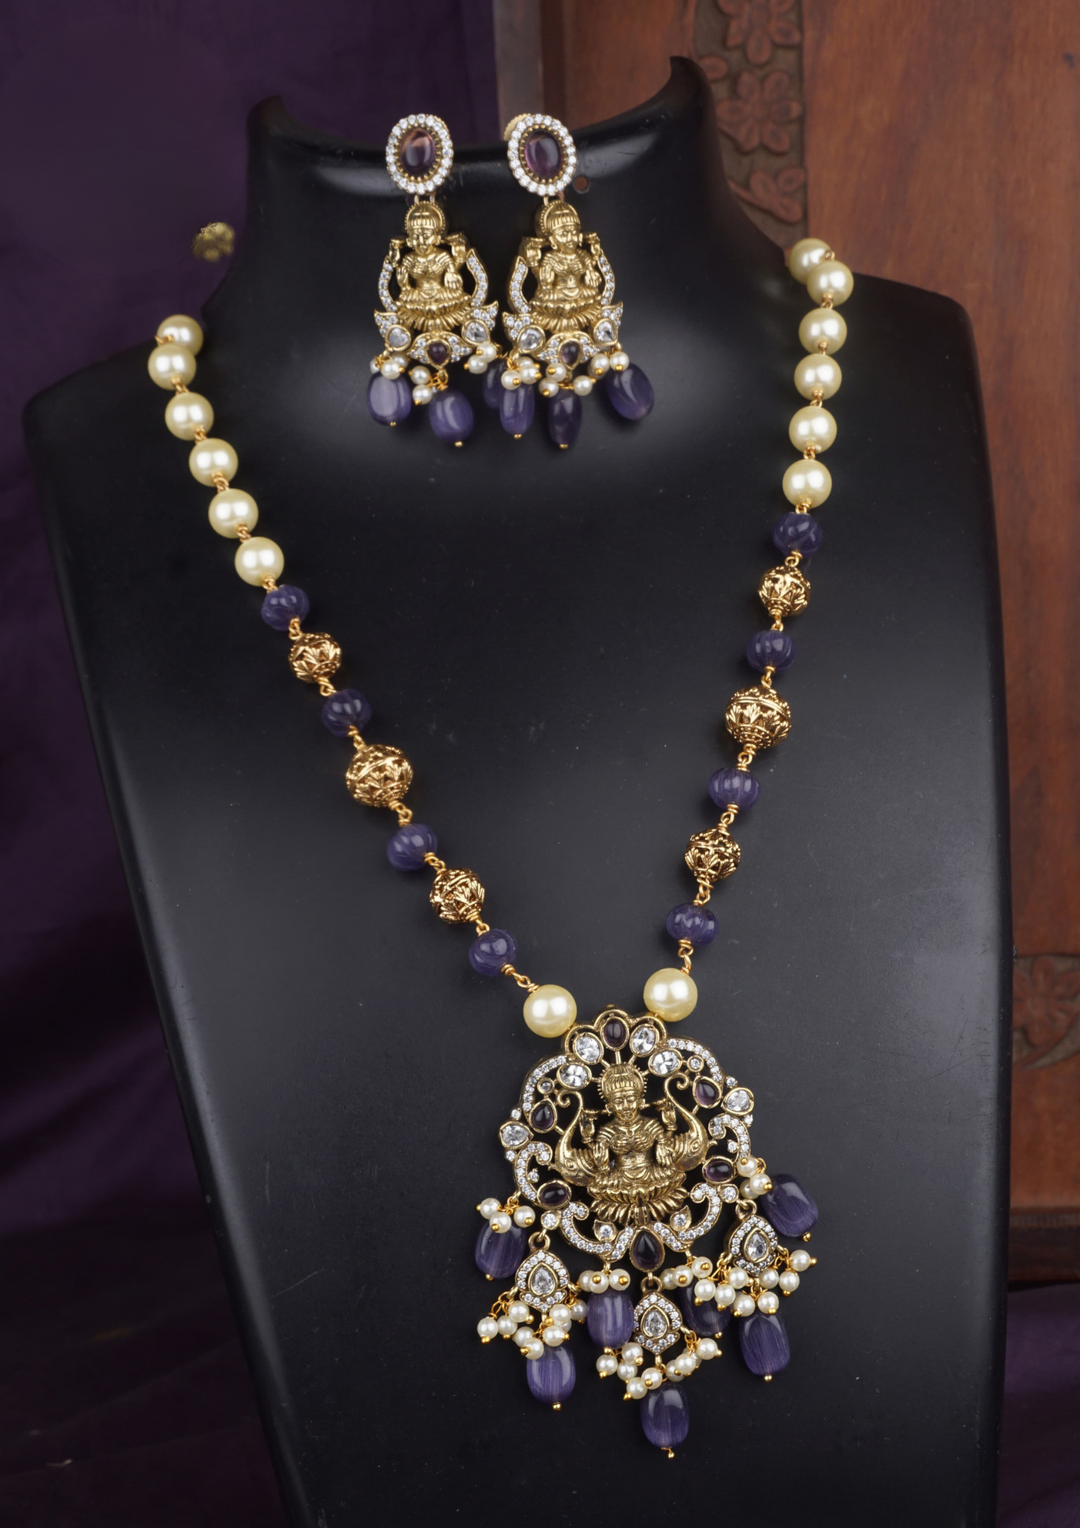 Victorian mehndi  temple jewellery necklace set with earrings LC1015020